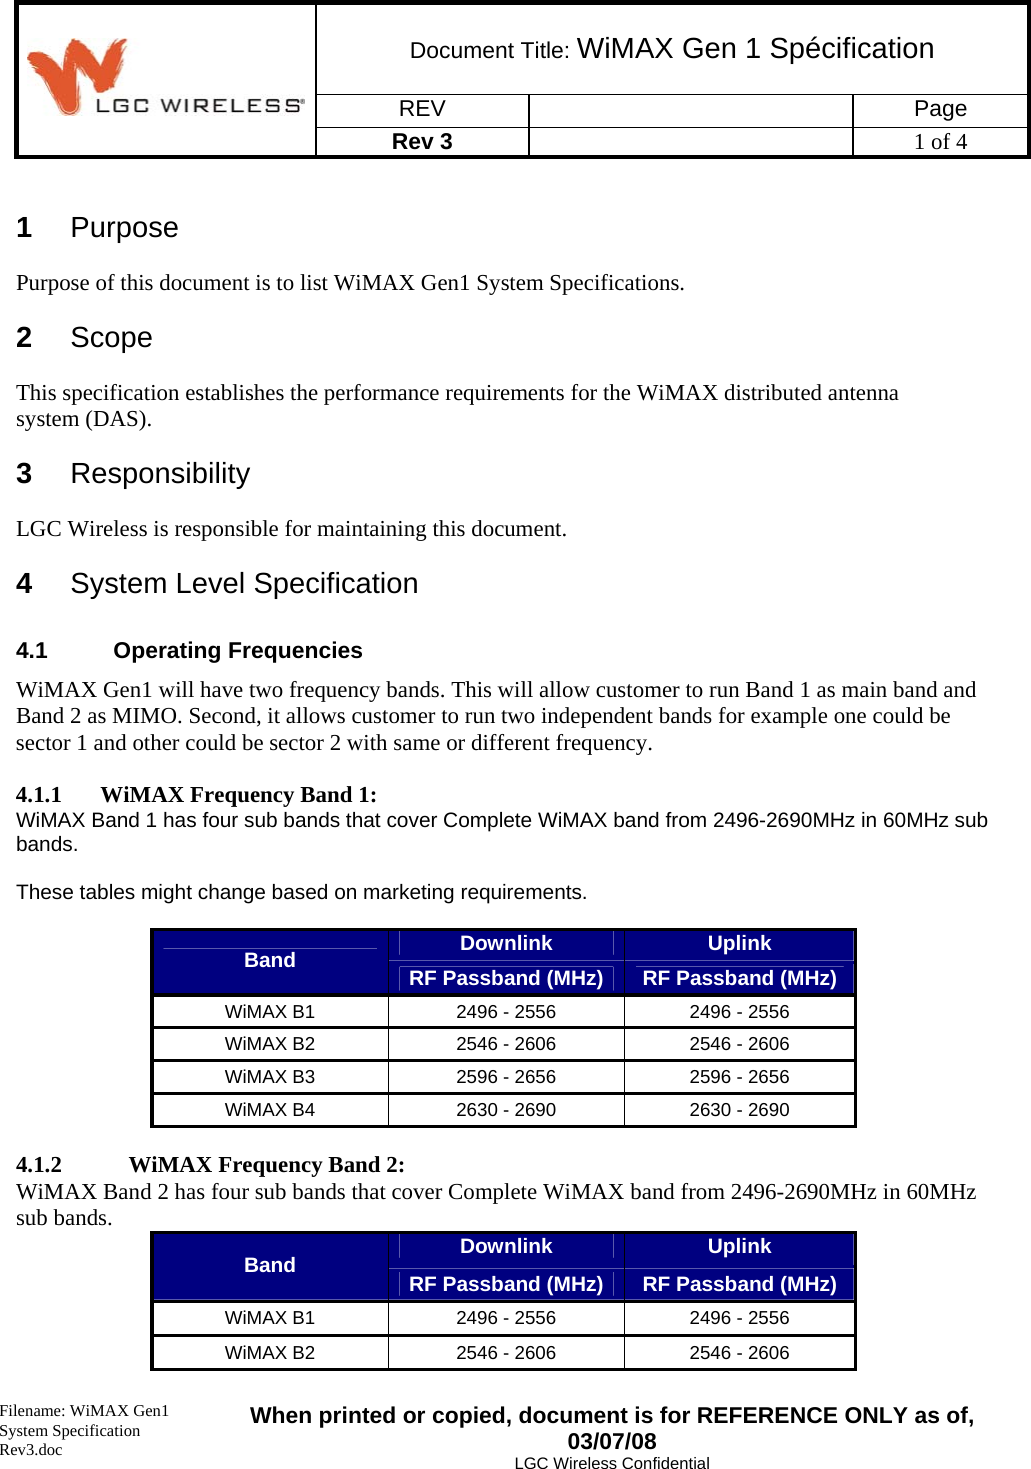 Document Title: WiMAX Gen 1 Spécification REV   Page  Rev 3    1 of 4   Filename: WiMAX Gen1 System Specification Rev3.doc When printed or copied, document is for REFERENCE ONLY as of, 03/07/08 LGC Wireless Confidential  1  Purpose Purpose of this document is to list WiMAX Gen1 System Specifications. 2  Scope This specification establishes the performance requirements for the WiMAX distributed antenna system (DAS). 3  Responsibility LGC Wireless is responsible for maintaining this document. 4  System Level Specification 4.1 Operating Frequencies WiMAX Gen1 will have two frequency bands. This will allow customer to run Band 1 as main band and Band 2 as MIMO. Second, it allows customer to run two independent bands for example one could be sector 1 and other could be sector 2 with same or different frequency.  4.1.1 WiMAX Frequency Band 1: WiMAX Band 1 has four sub bands that cover Complete WiMAX band from 2496-2690MHz in 60MHz sub bands.   These tables might change based on marketing requirements.  Downlink  Uplink Band  RF Passband (MHz)  RF Passband (MHz) WiMAX B1  2496 - 2556  2496 - 2556 WiMAX B2  2546 - 2606  2546 - 2606 WiMAX B3  2596 - 2656  2596 - 2656 WiMAX B4  2630 - 2690  2630 - 2690  4.1.2 WiMAX Frequency Band 2: WiMAX Band 2 has four sub bands that cover Complete WiMAX band from 2496-2690MHz in 60MHz sub bands.  Downlink  Uplink Band  RF Passband (MHz)  RF Passband (MHz) WiMAX B1  2496 - 2556  2496 - 2556 WiMAX B2  2546 - 2606  2546 - 2606 